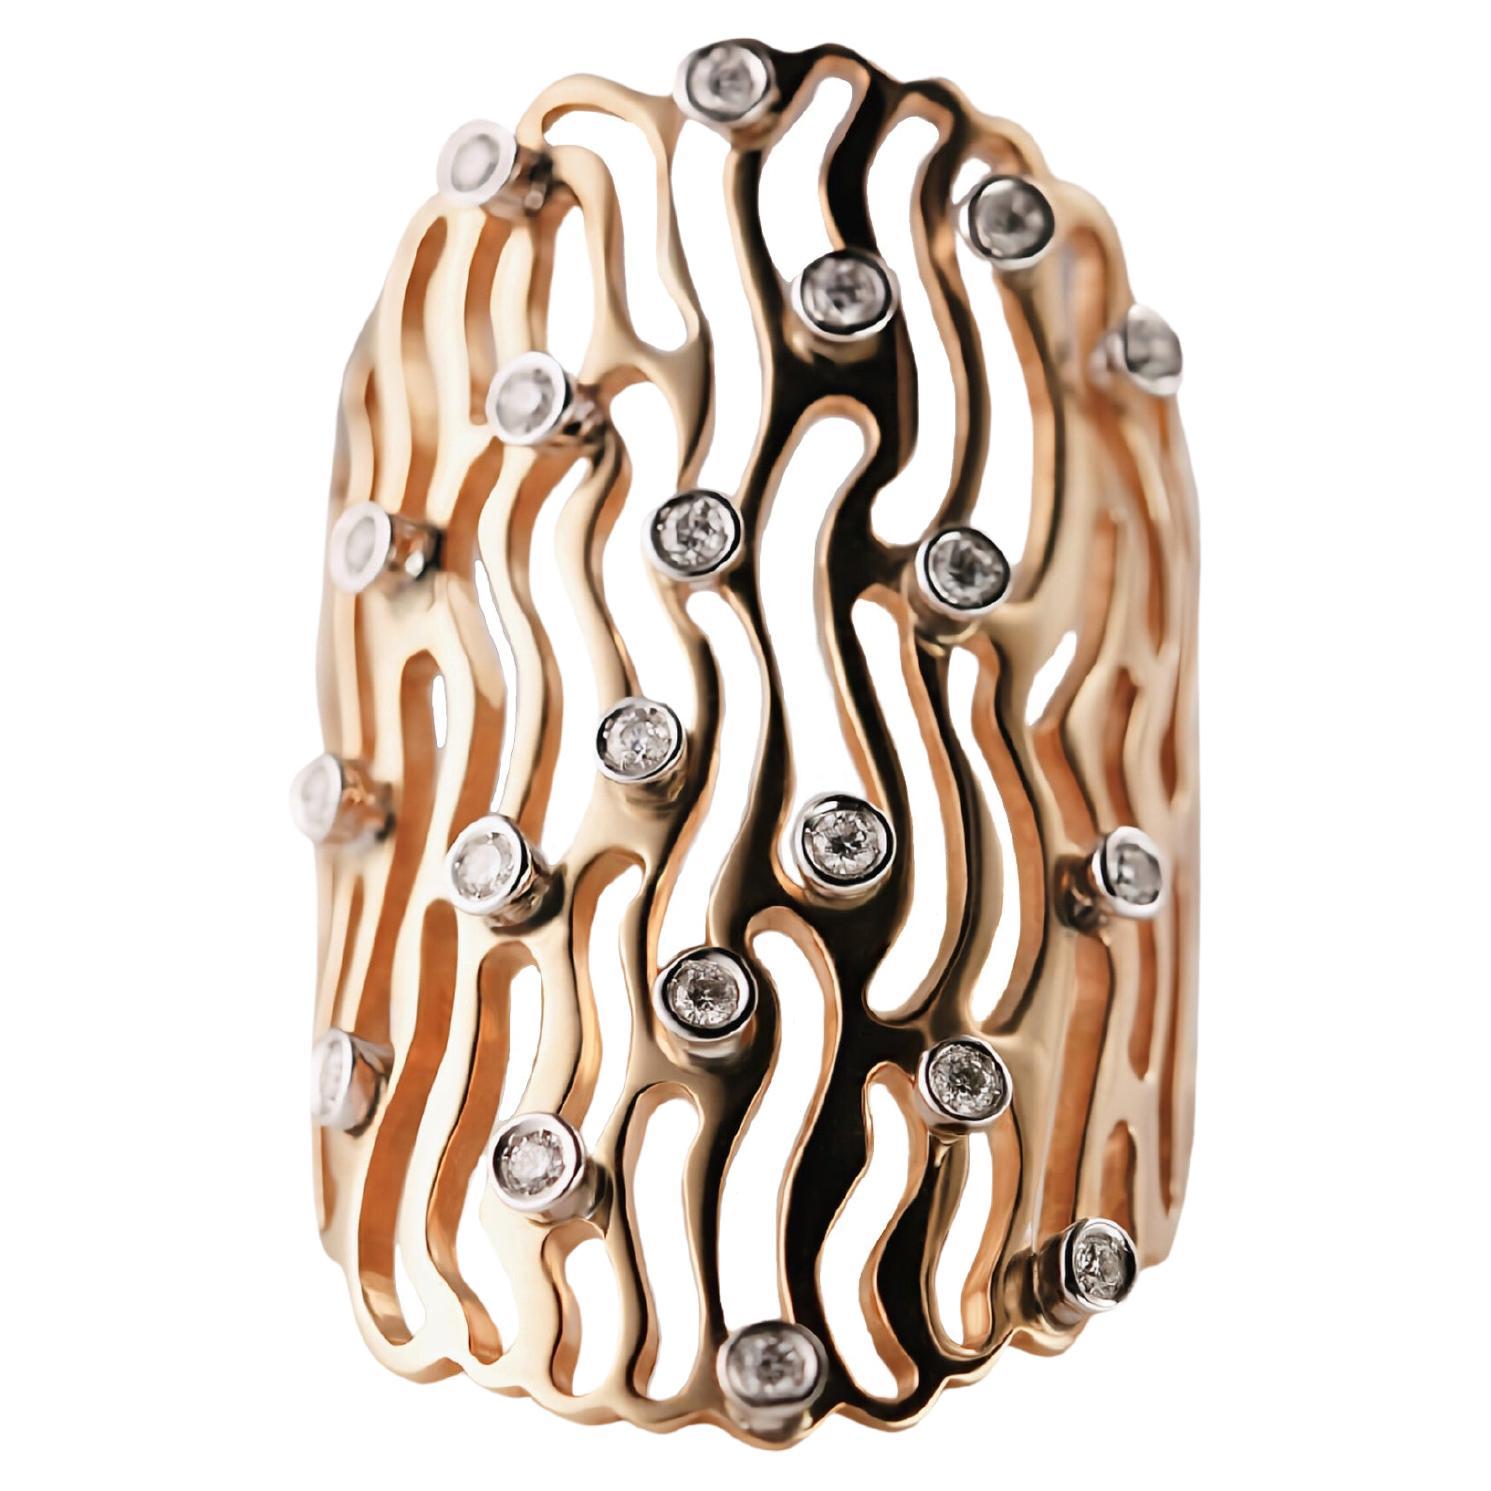 "Whispering Waters": 18kt Rose Gold Ring Featuring Brilliant White Diamonds For Sale